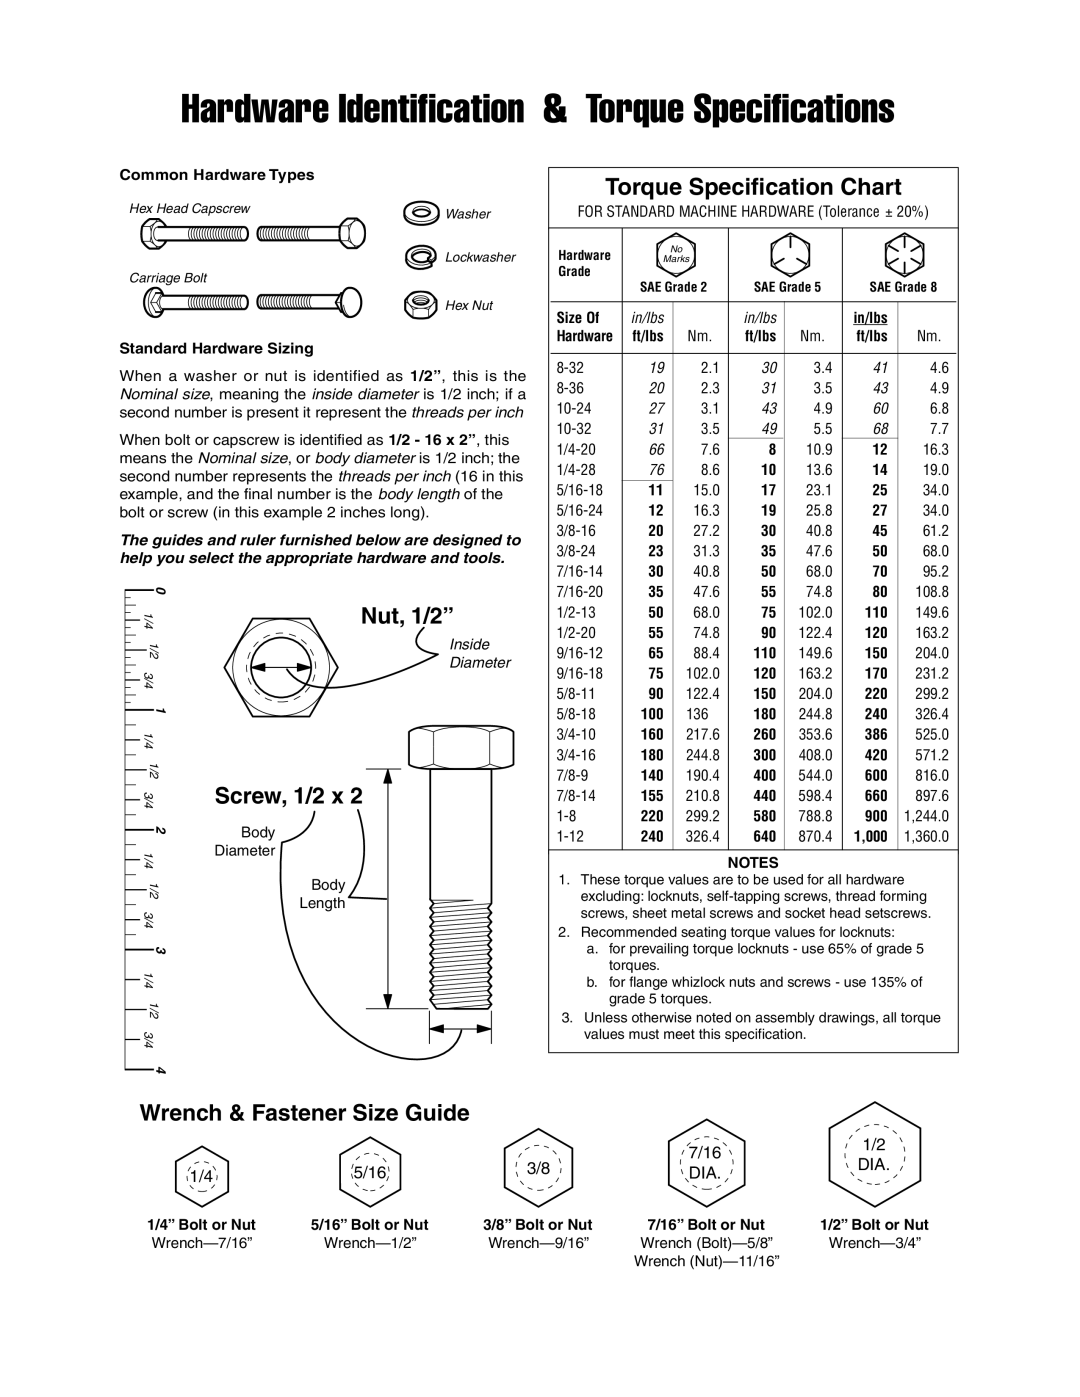 Snapper 4570 Wrench & Fastener Size Guide, Hardware Identification & Torque Specifications, Torque Specification Chart 